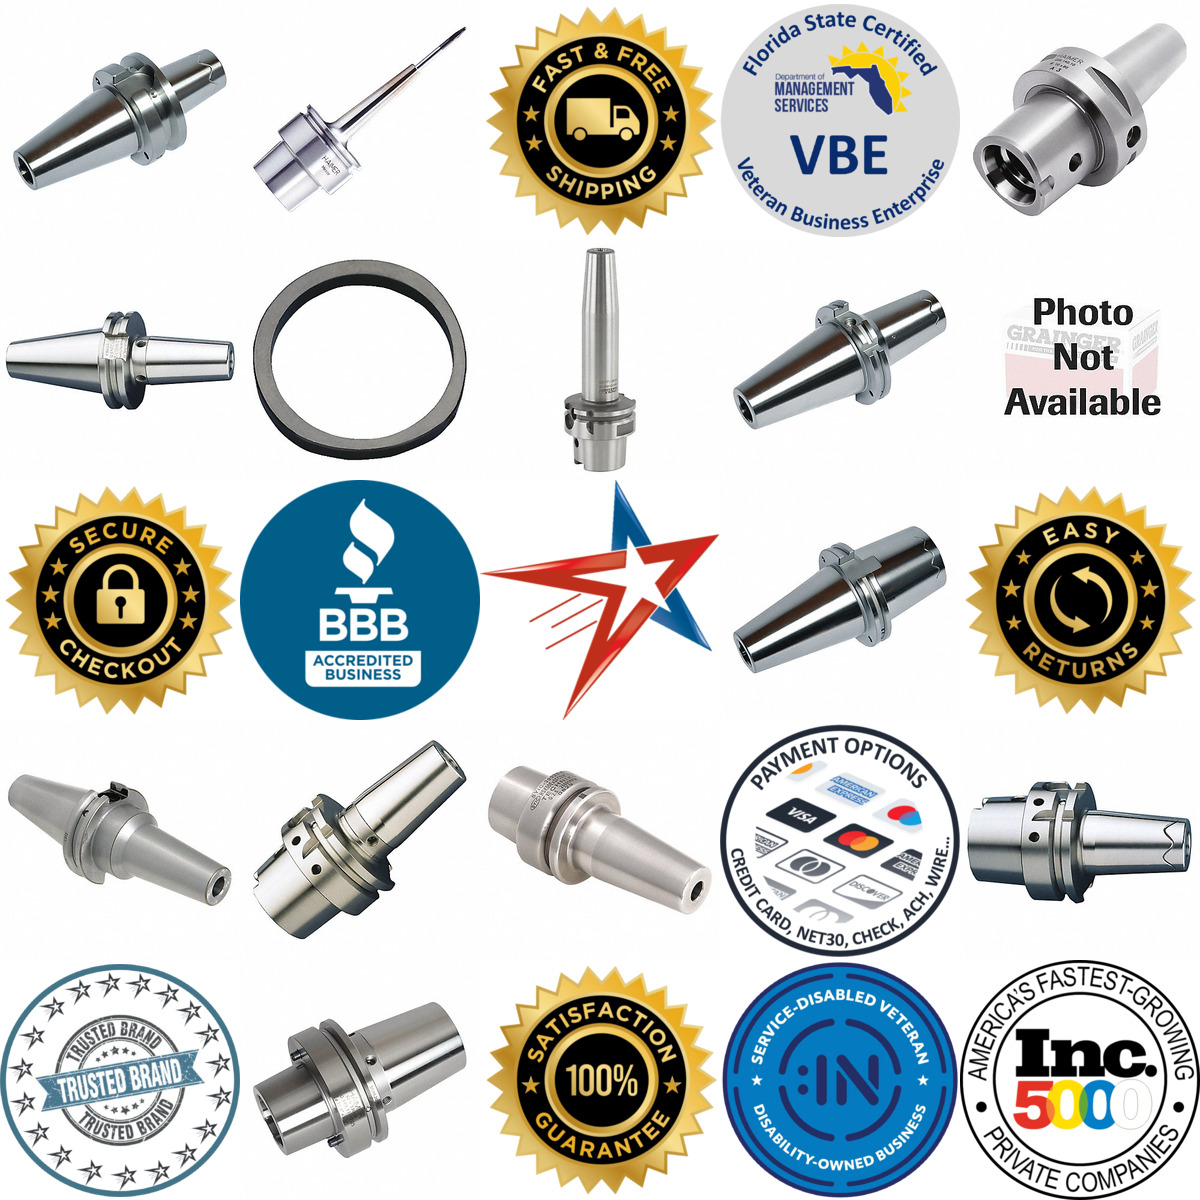 A selection of Toolholding and Tooling Systems   Shrink Fit Machi products on GoVets